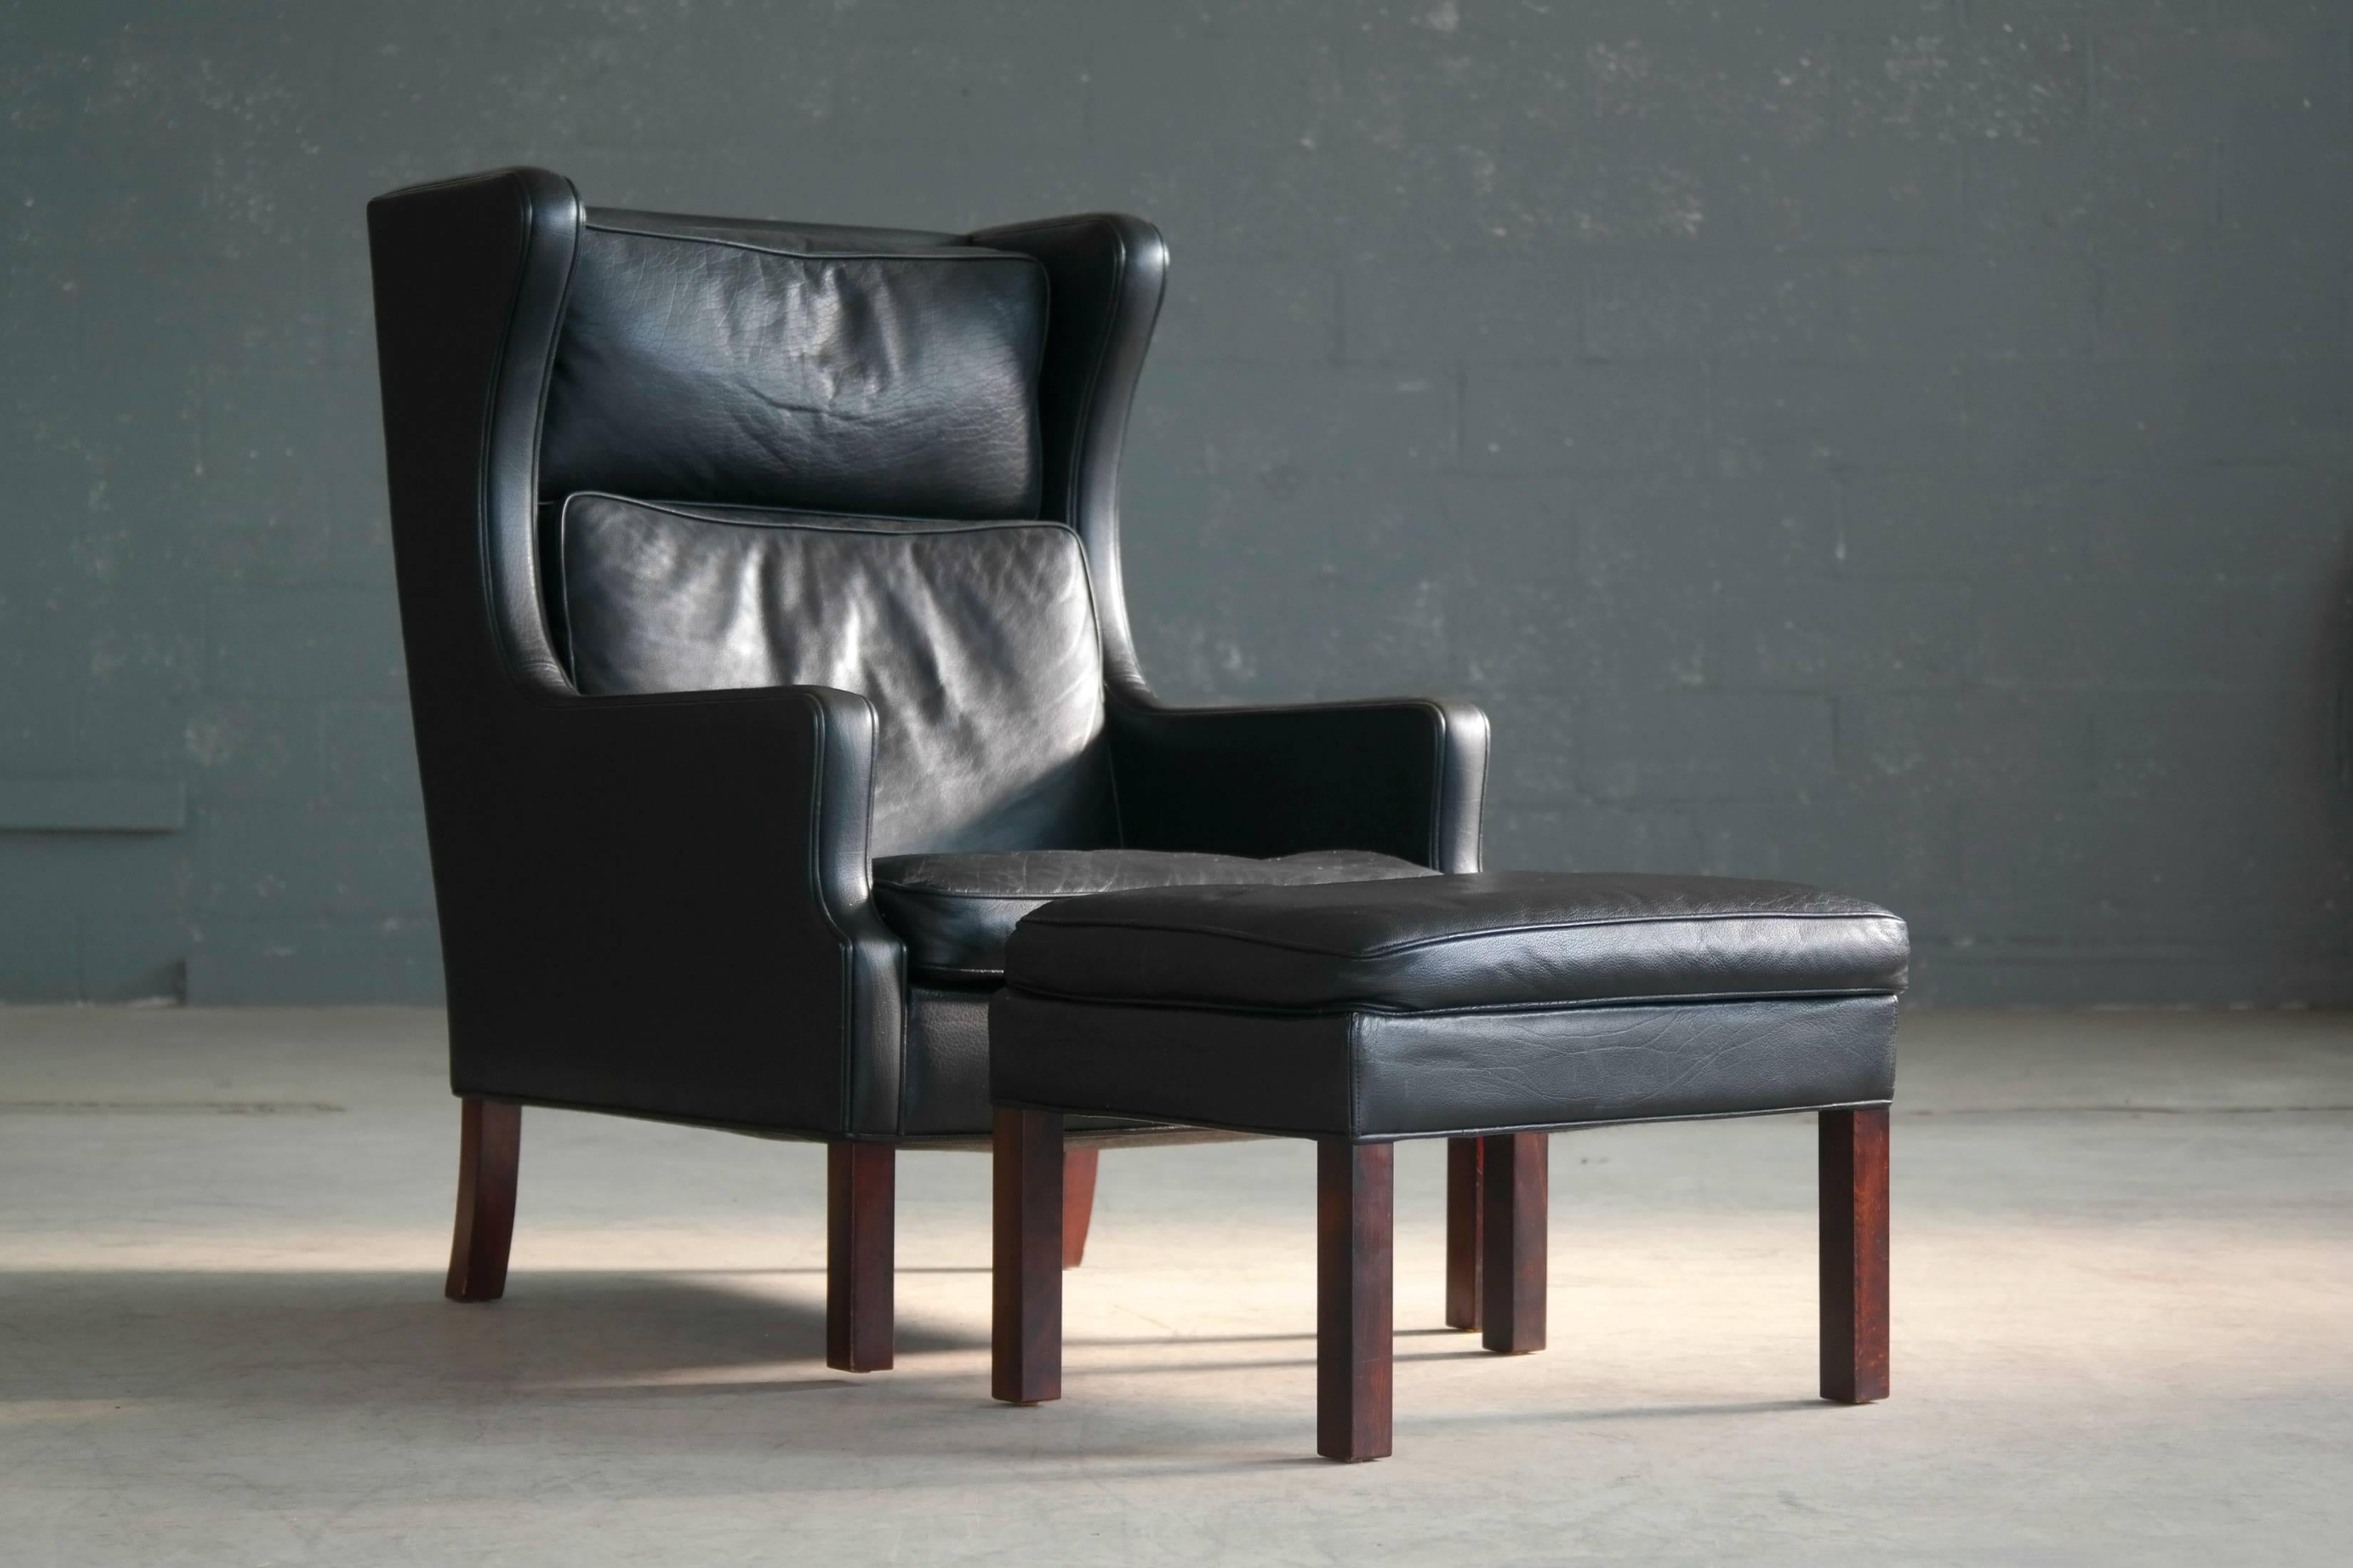 Classic Borge Mogensen style high back lounge chair with ottoman in black leather attributed to Georg Thams and Vejen Polstermobelfabrik, Denmark. Very nice quality leather with great patina and age wear including a little bit of color fading on the